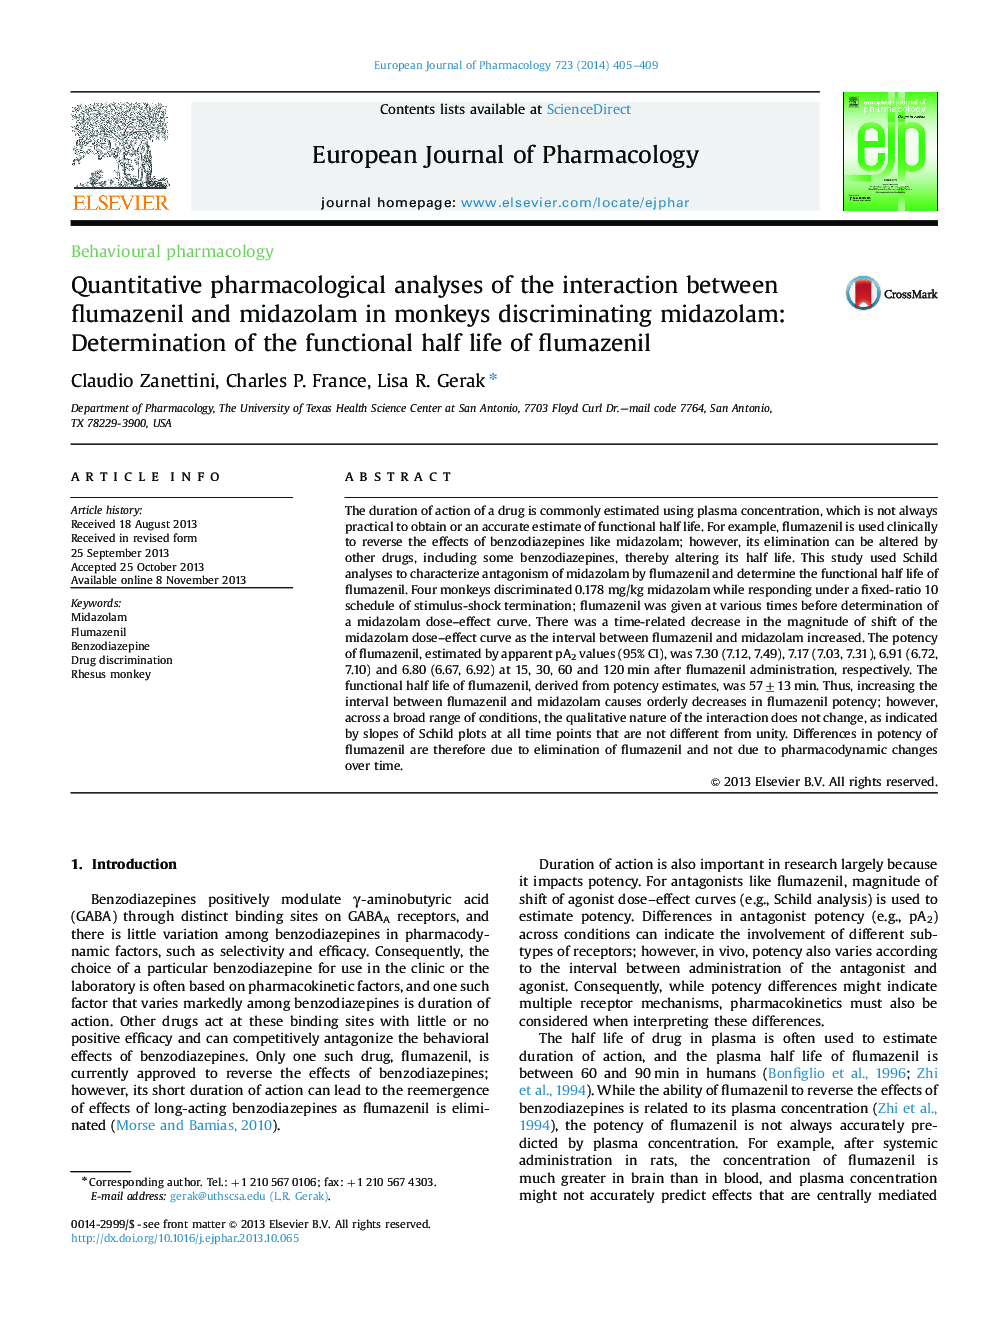 Quantitative pharmacological analyses of the interaction between flumazenil and midazolam in monkeys discriminating midazolam: Determination of the functional half life of flumazenil